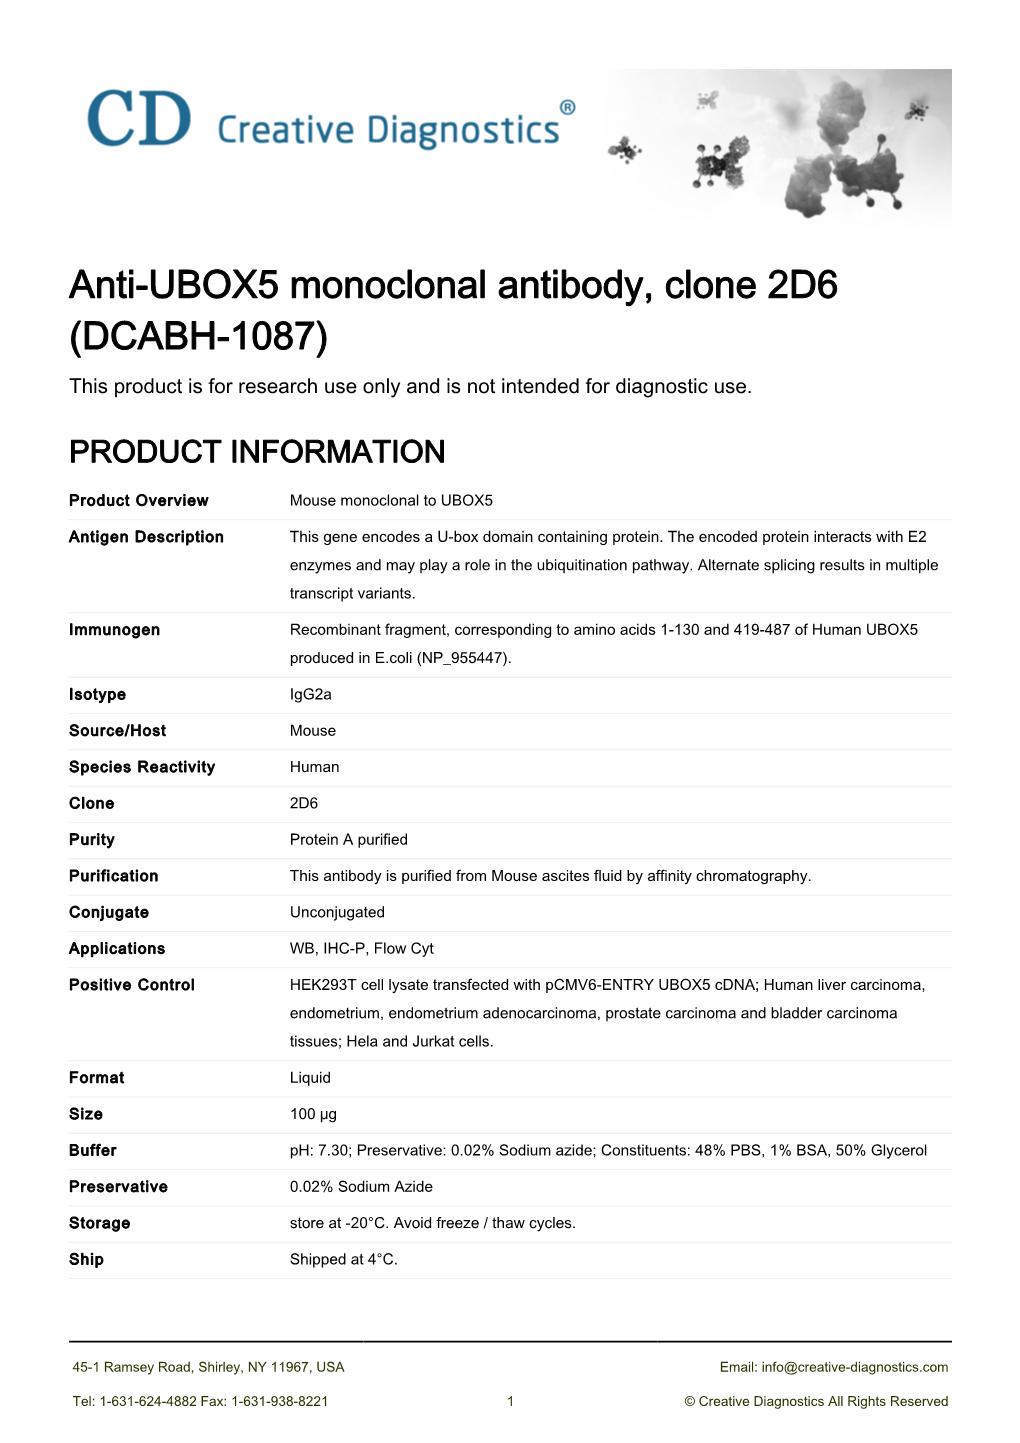 Anti-UBOX5 Monoclonal Antibody, Clone 2D6 (DCABH-1087) This Product Is for Research Use Only and Is Not Intended for Diagnostic Use